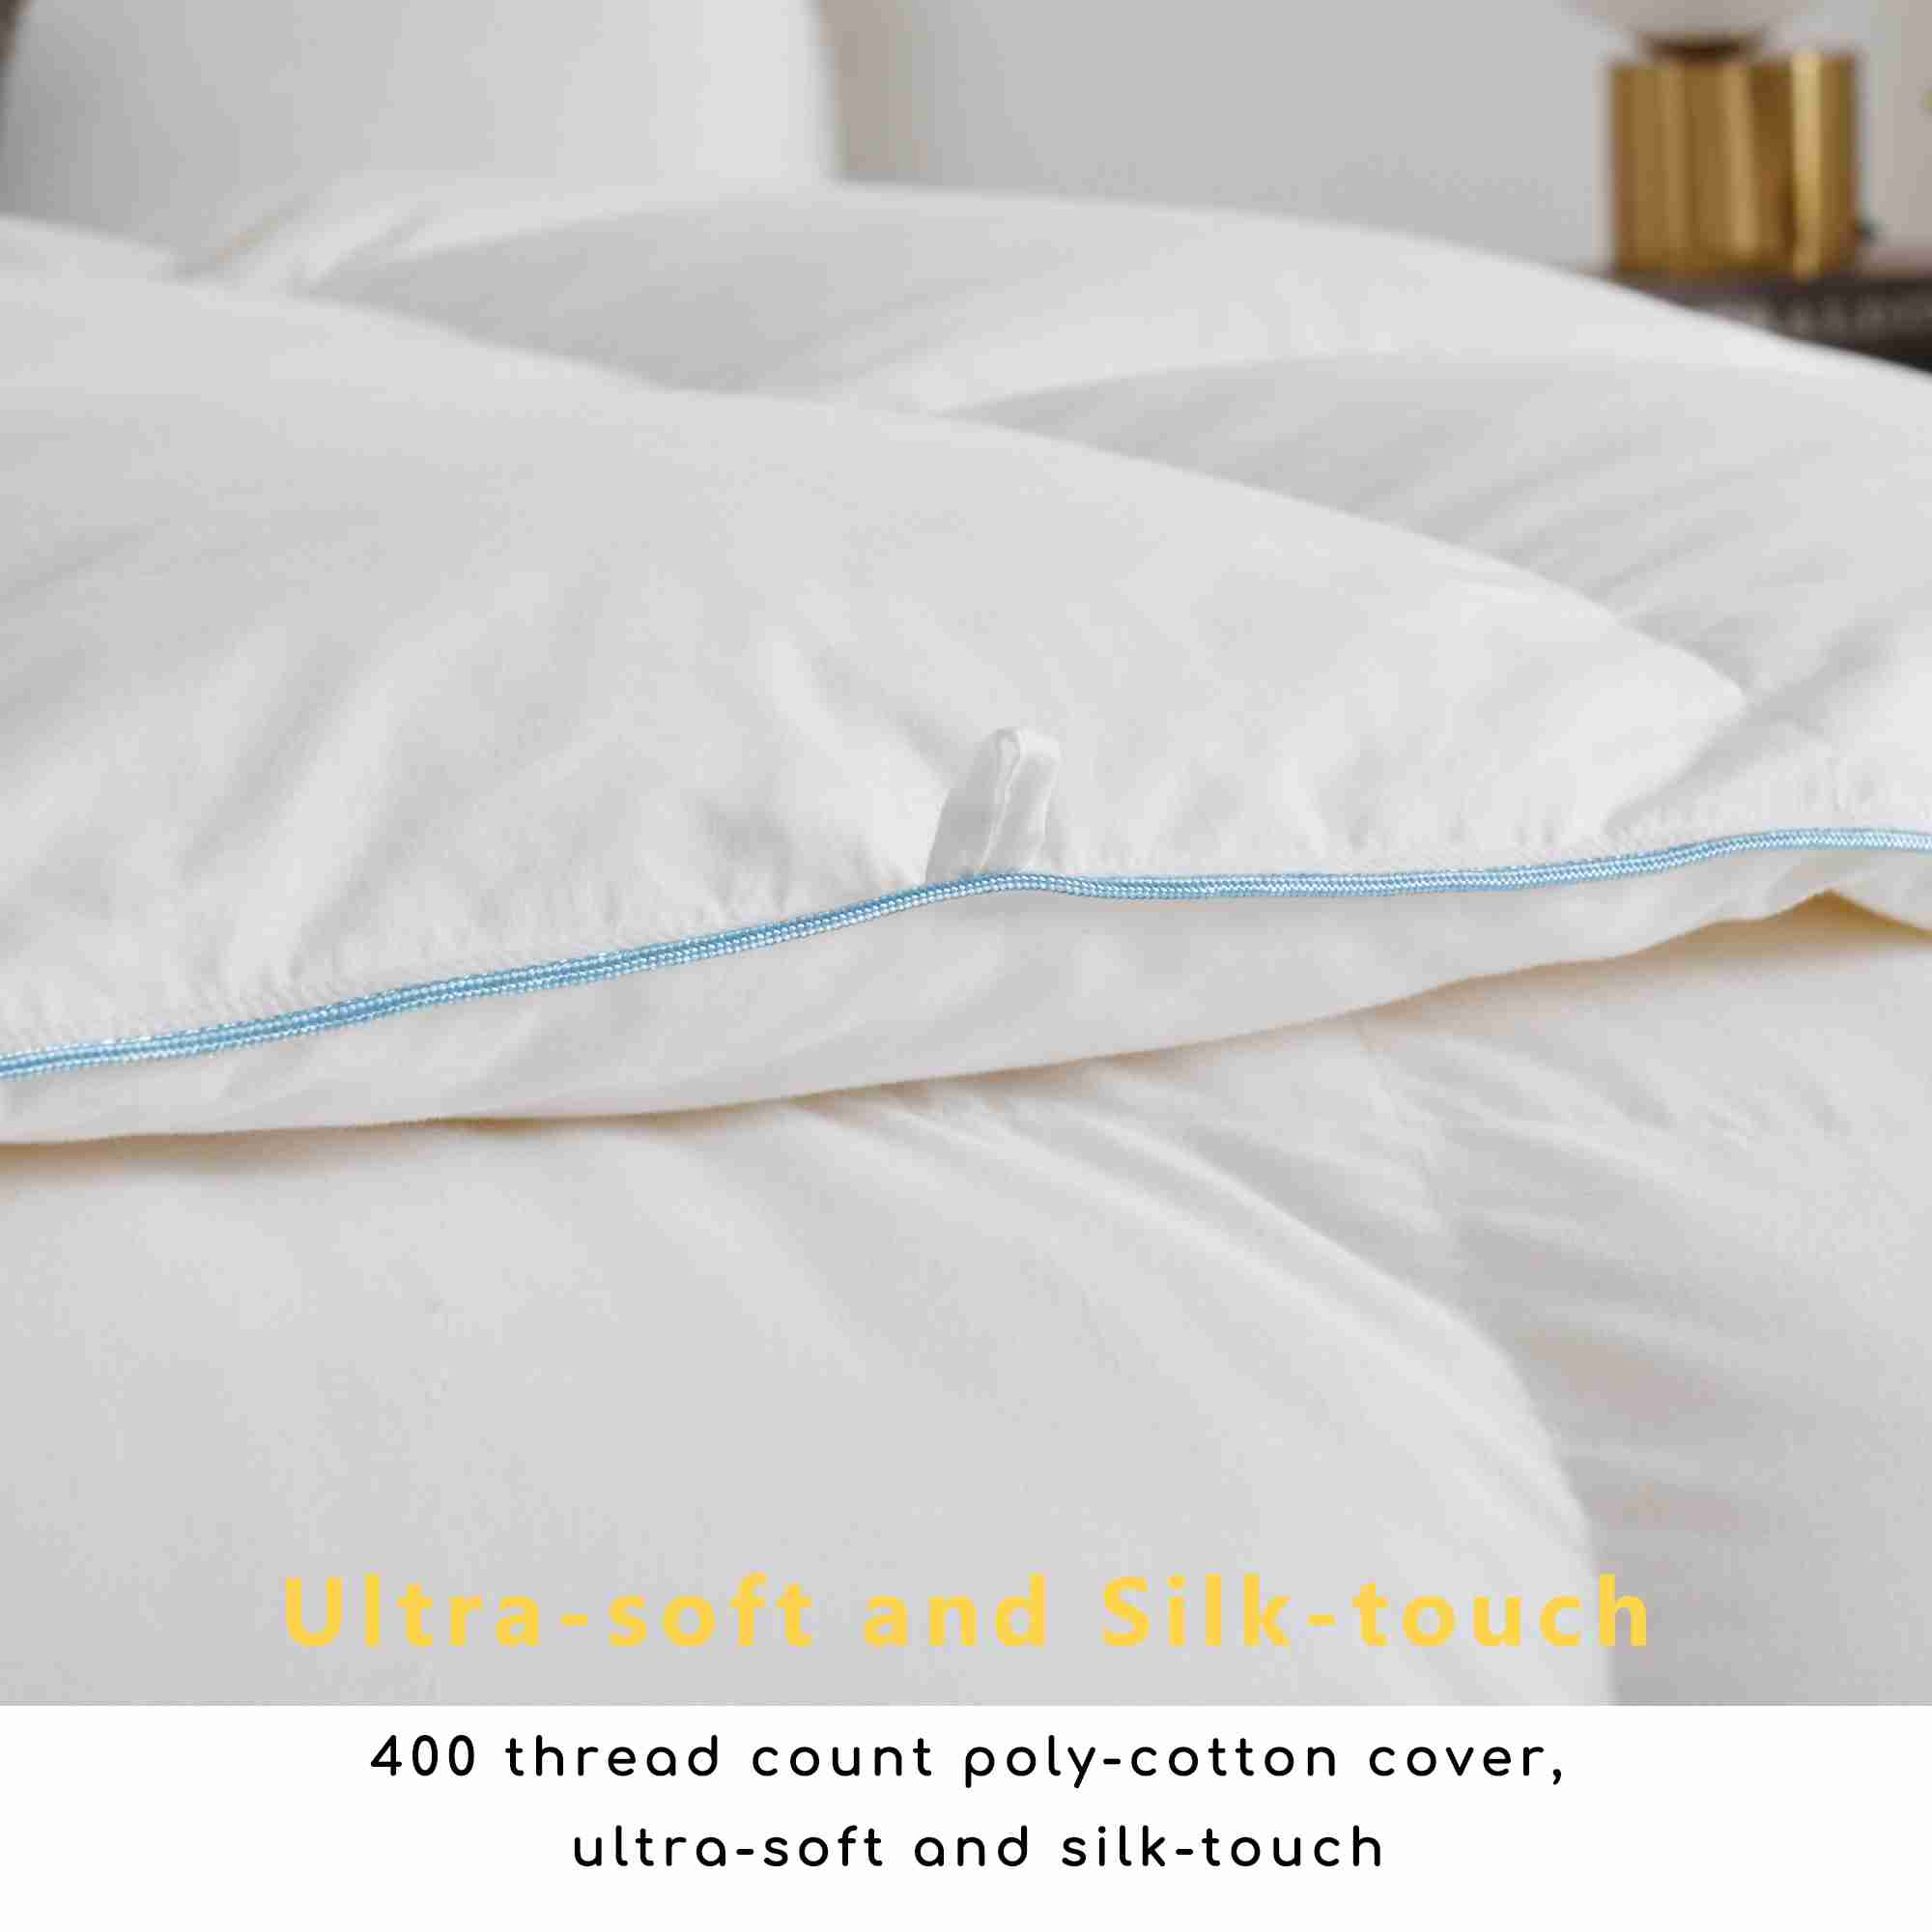 heavyweight-down-comforter-king-size-hotel-collection with discount code